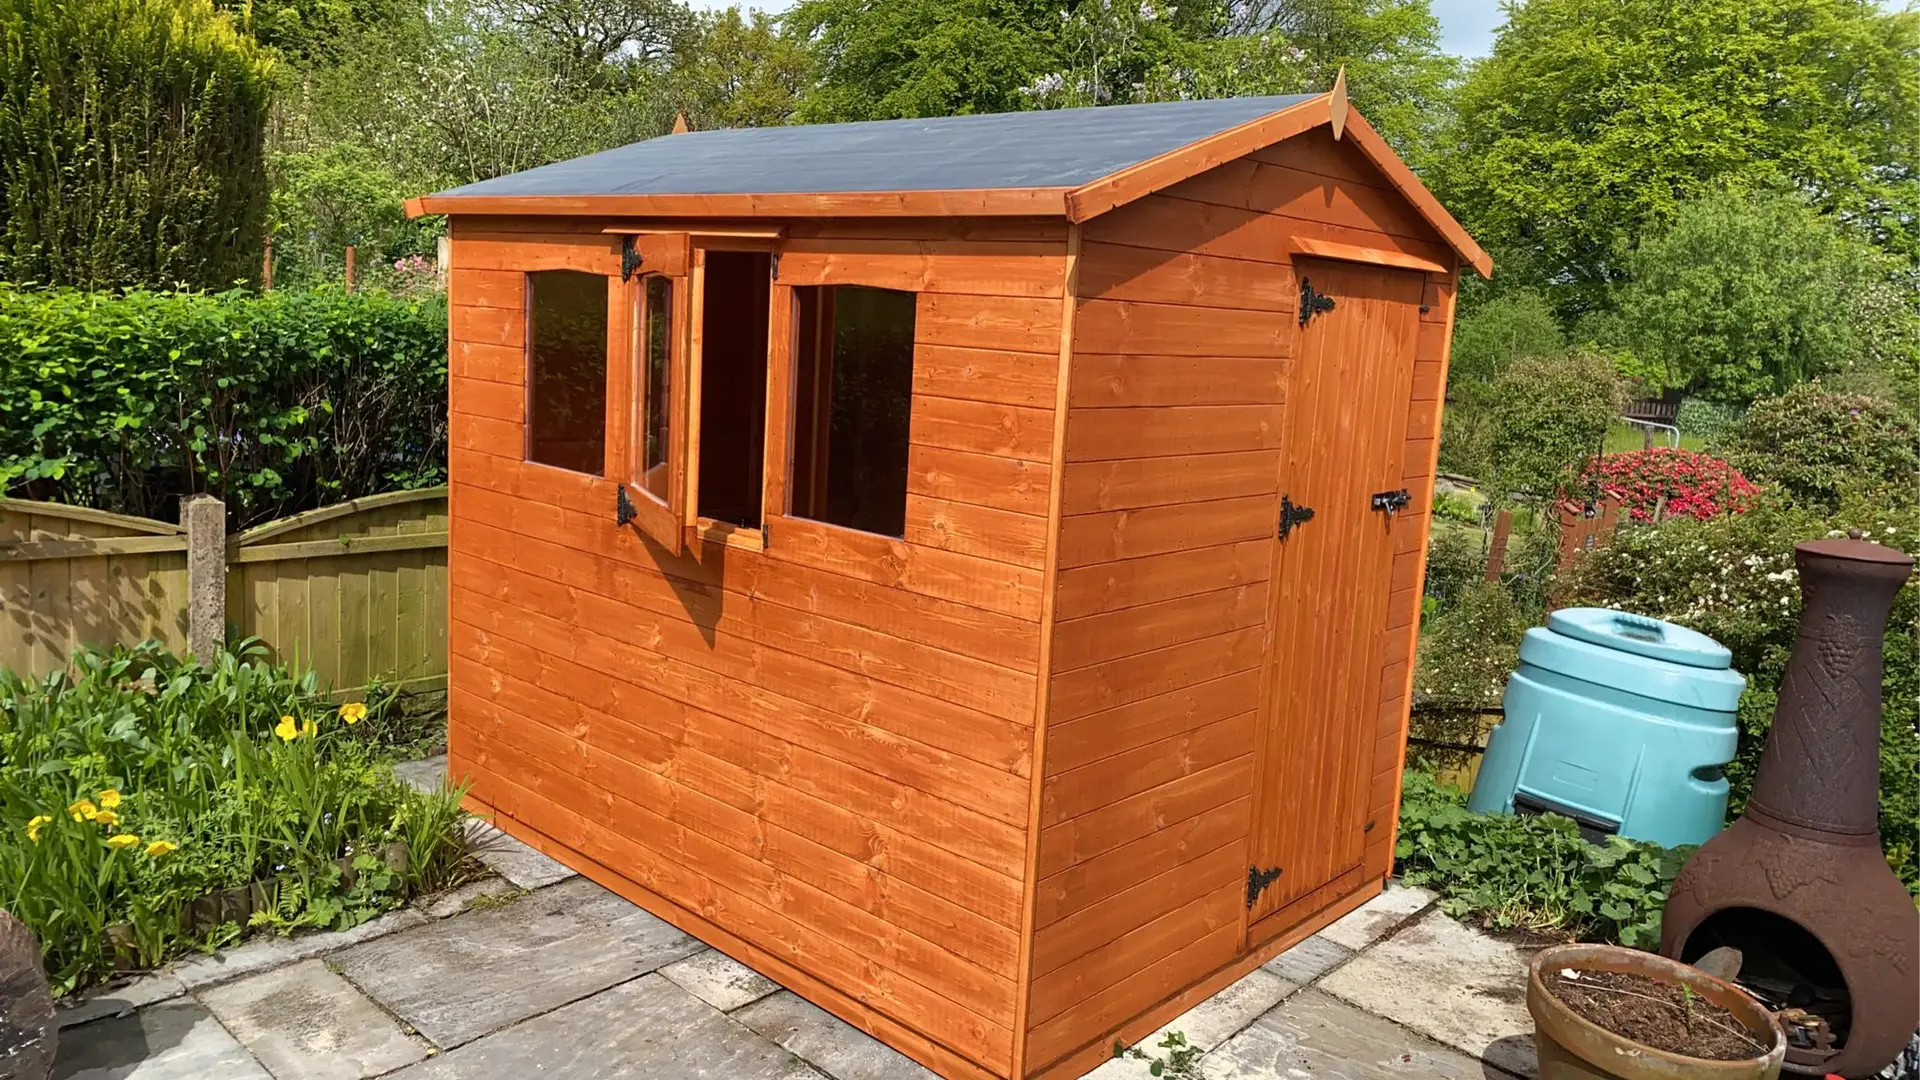 THIS IS A HEAVY DUTY GARDEN SHED MADE BY LANCASHIRE SUMMERHOUSES